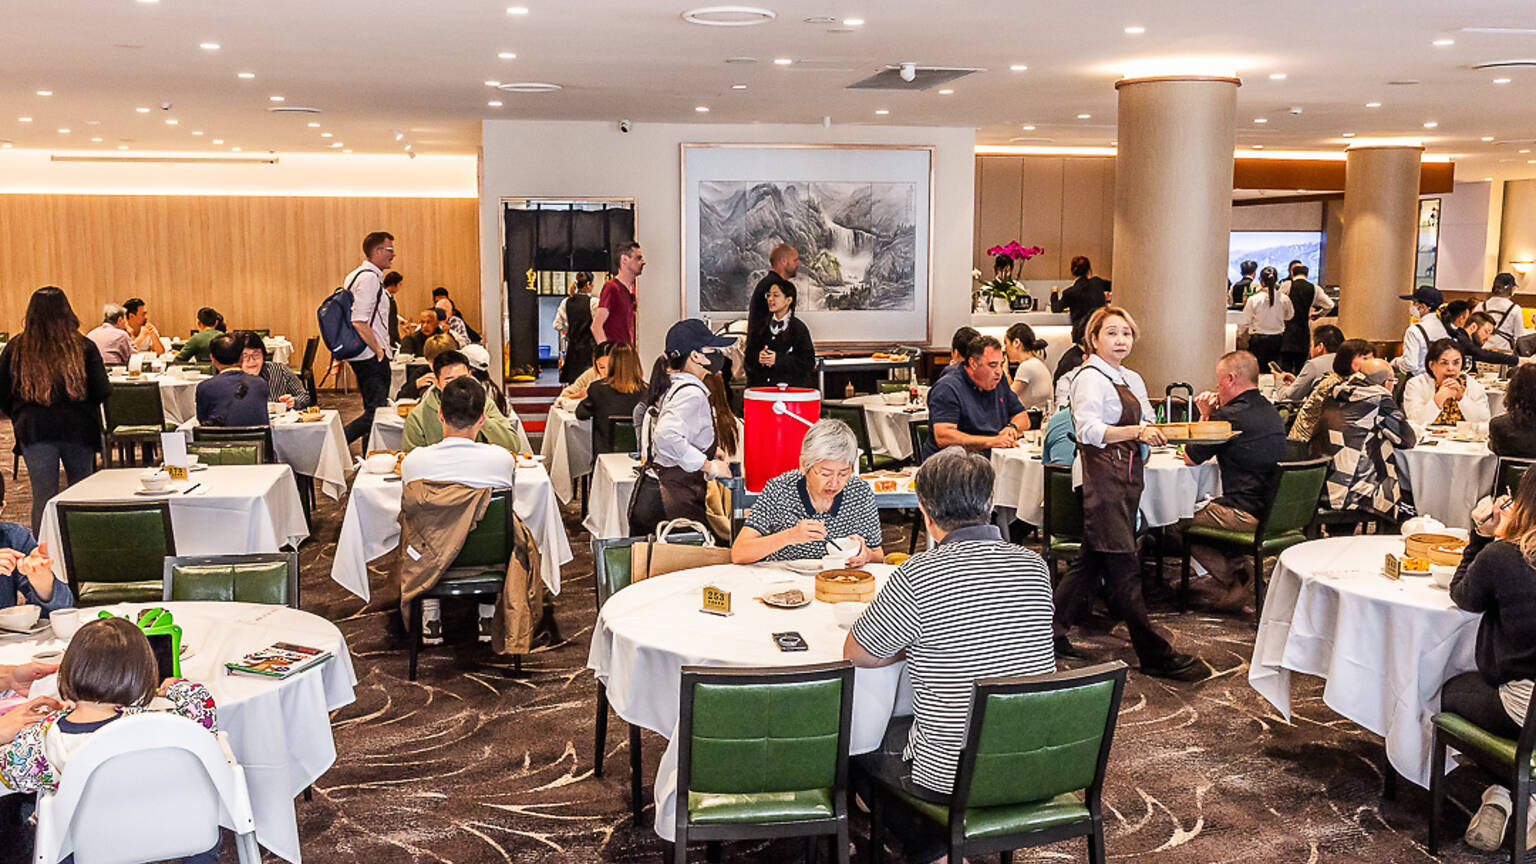 The best restaurants for yum cha in Sydney